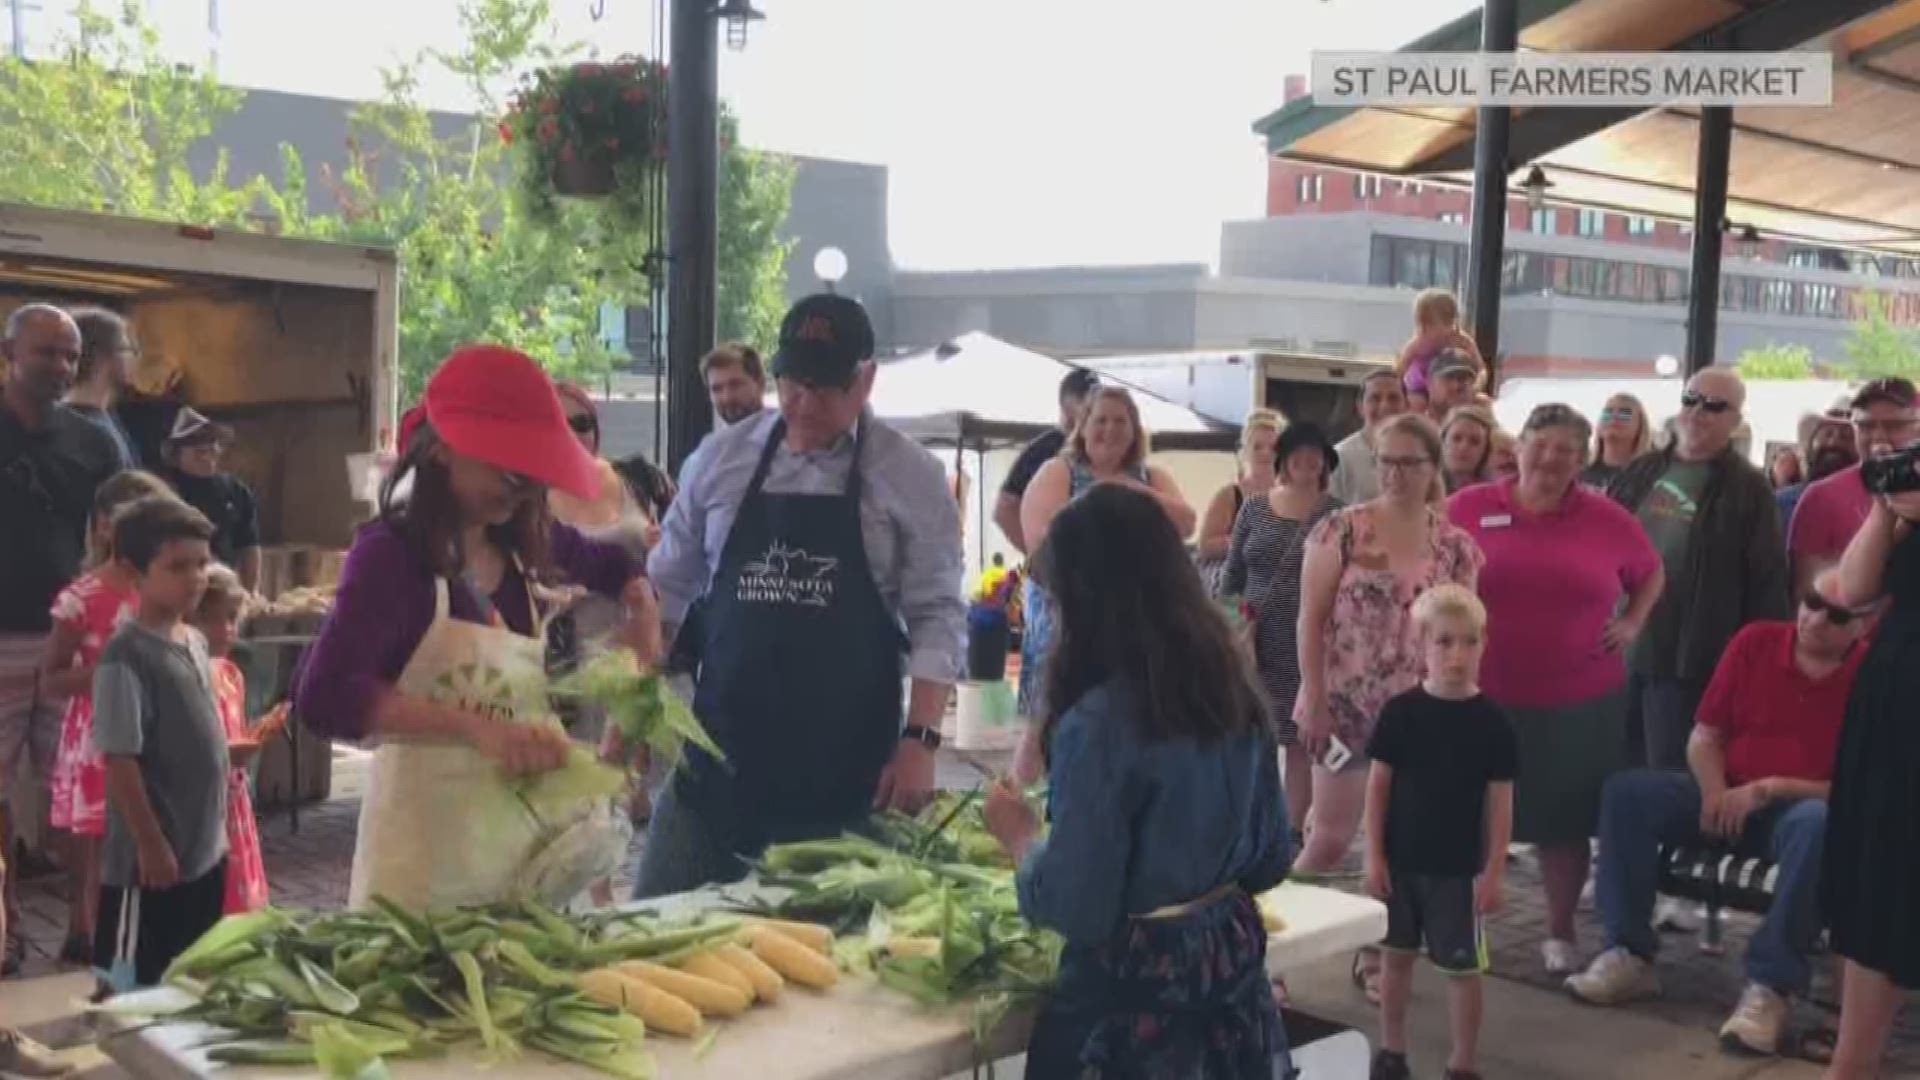 David Kotsonas from the St. Paul Farmers’ Market talked with KARE 11 about National Farmers’ Market Week, happening now through Aug. 10, and the social and economic impacts that farmers’ markets have in the communities they serve.